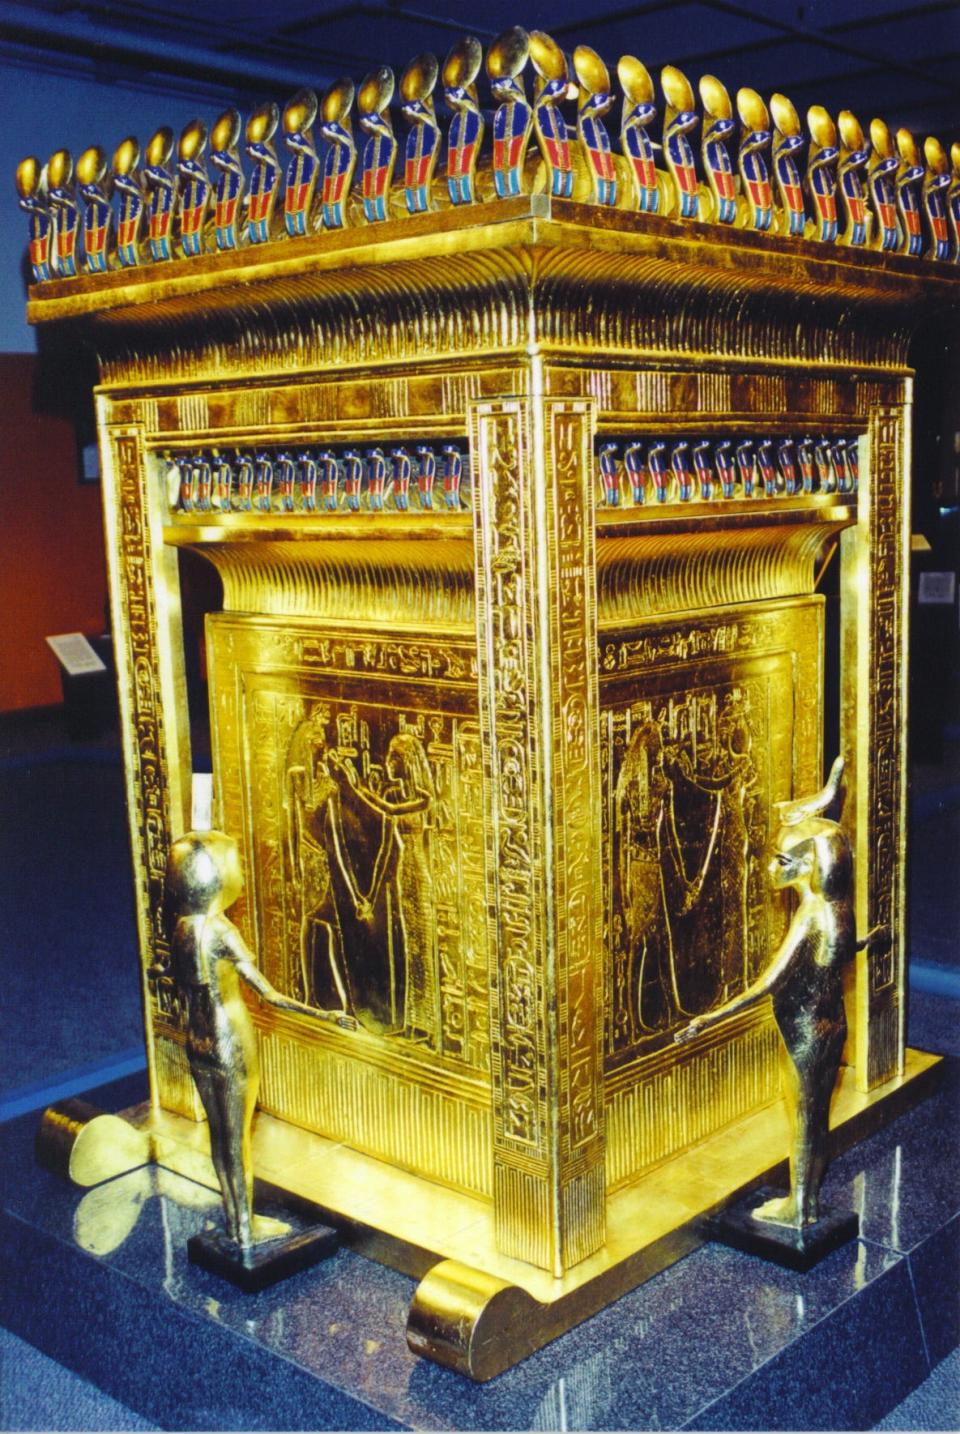 A reproduction of King Tut's Golden Shrine and Tutelary Goddess are part of an upcoming exhbit, Tutankhamun: Return of the King Exhibition, at IMAG in Fort Myers.